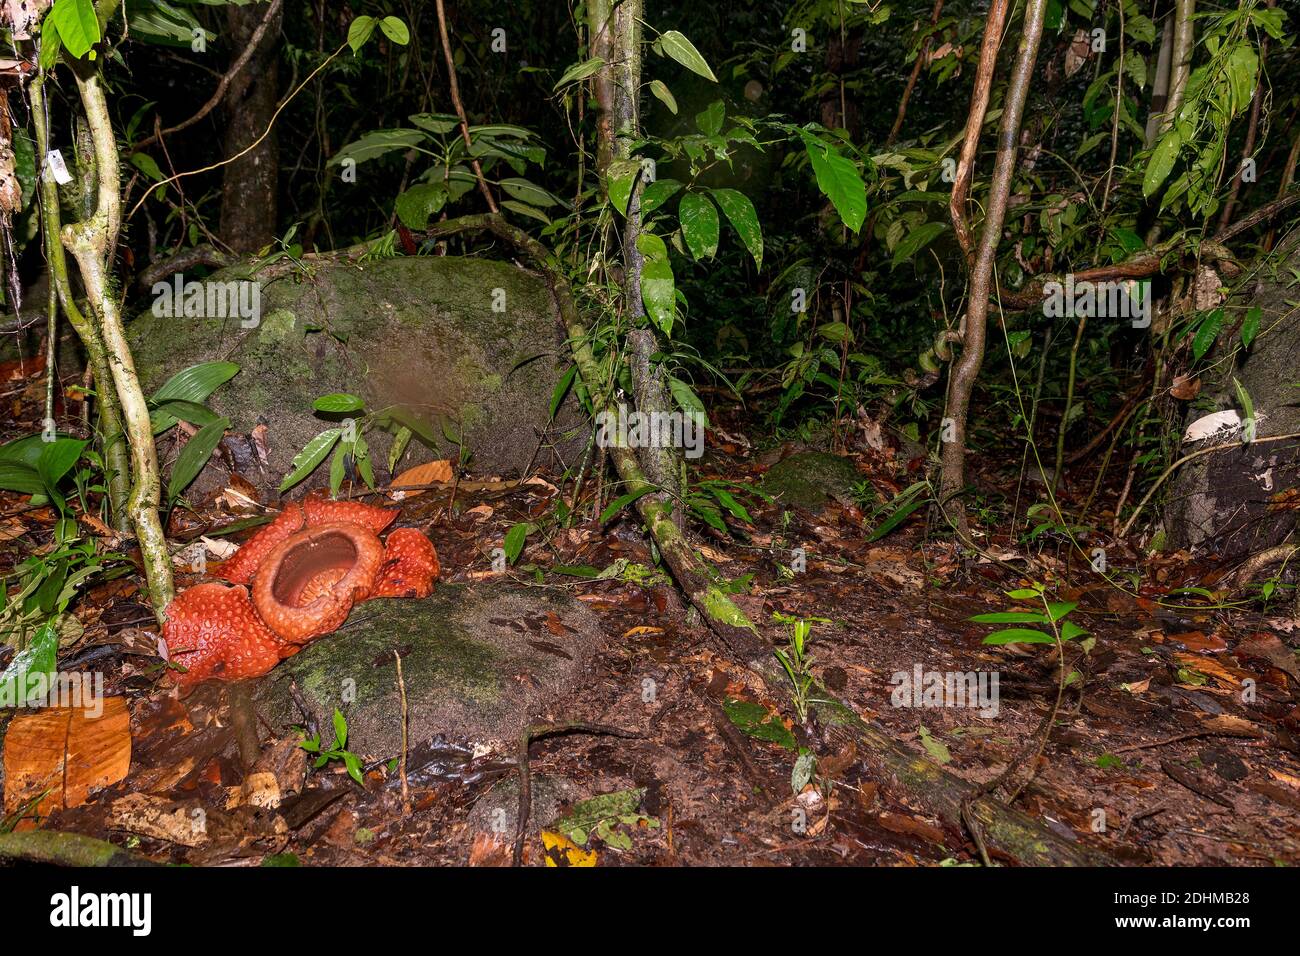 Giant flower of the parasitic Rafflesia tuan-mudae on the forest floor of Gundung Gading National Park, Sarawak, Borneo.  The flower is about 50 cm in Stock Photo